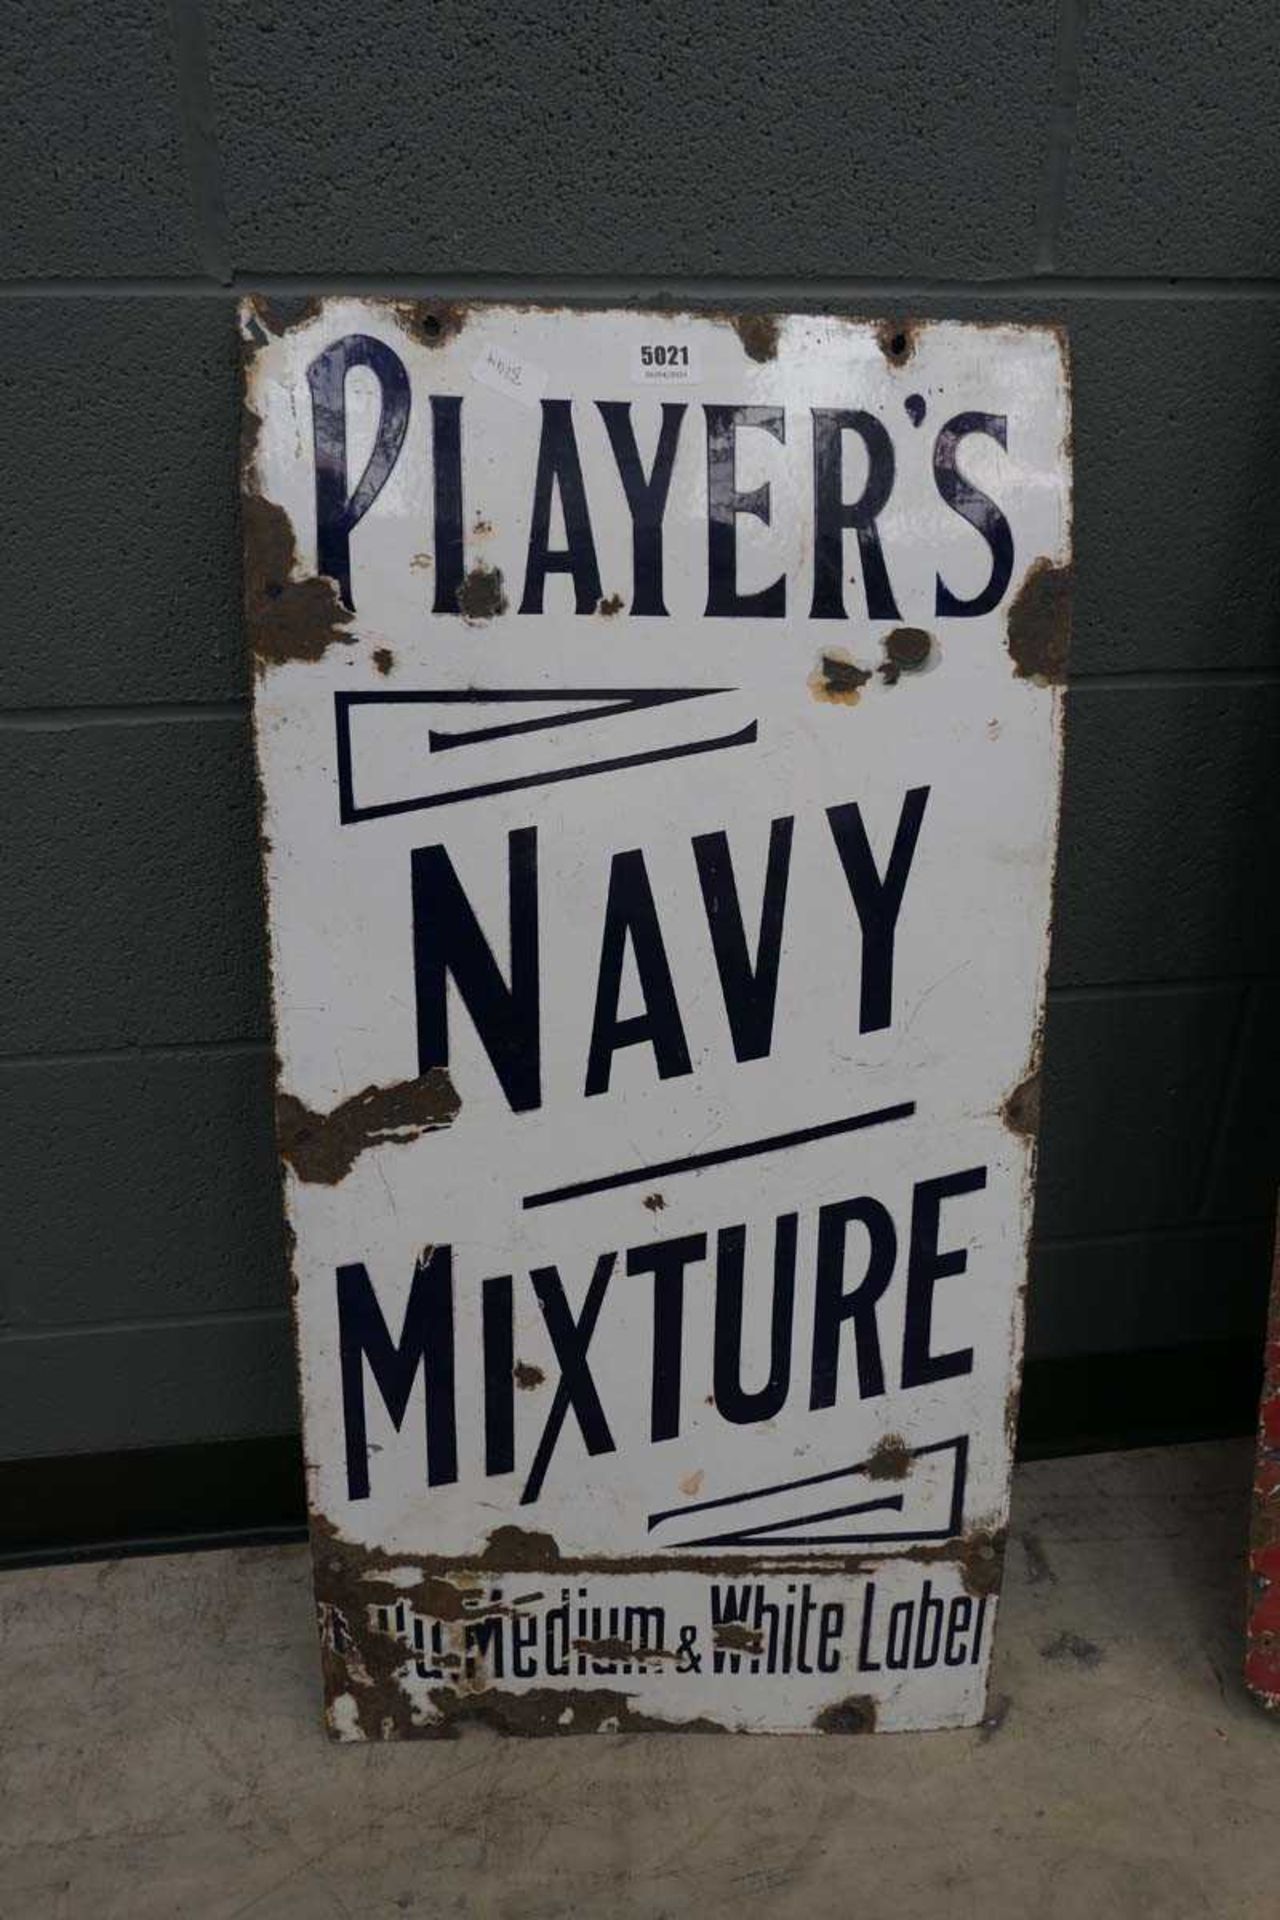 Enameled Player's Navy Mixture sign